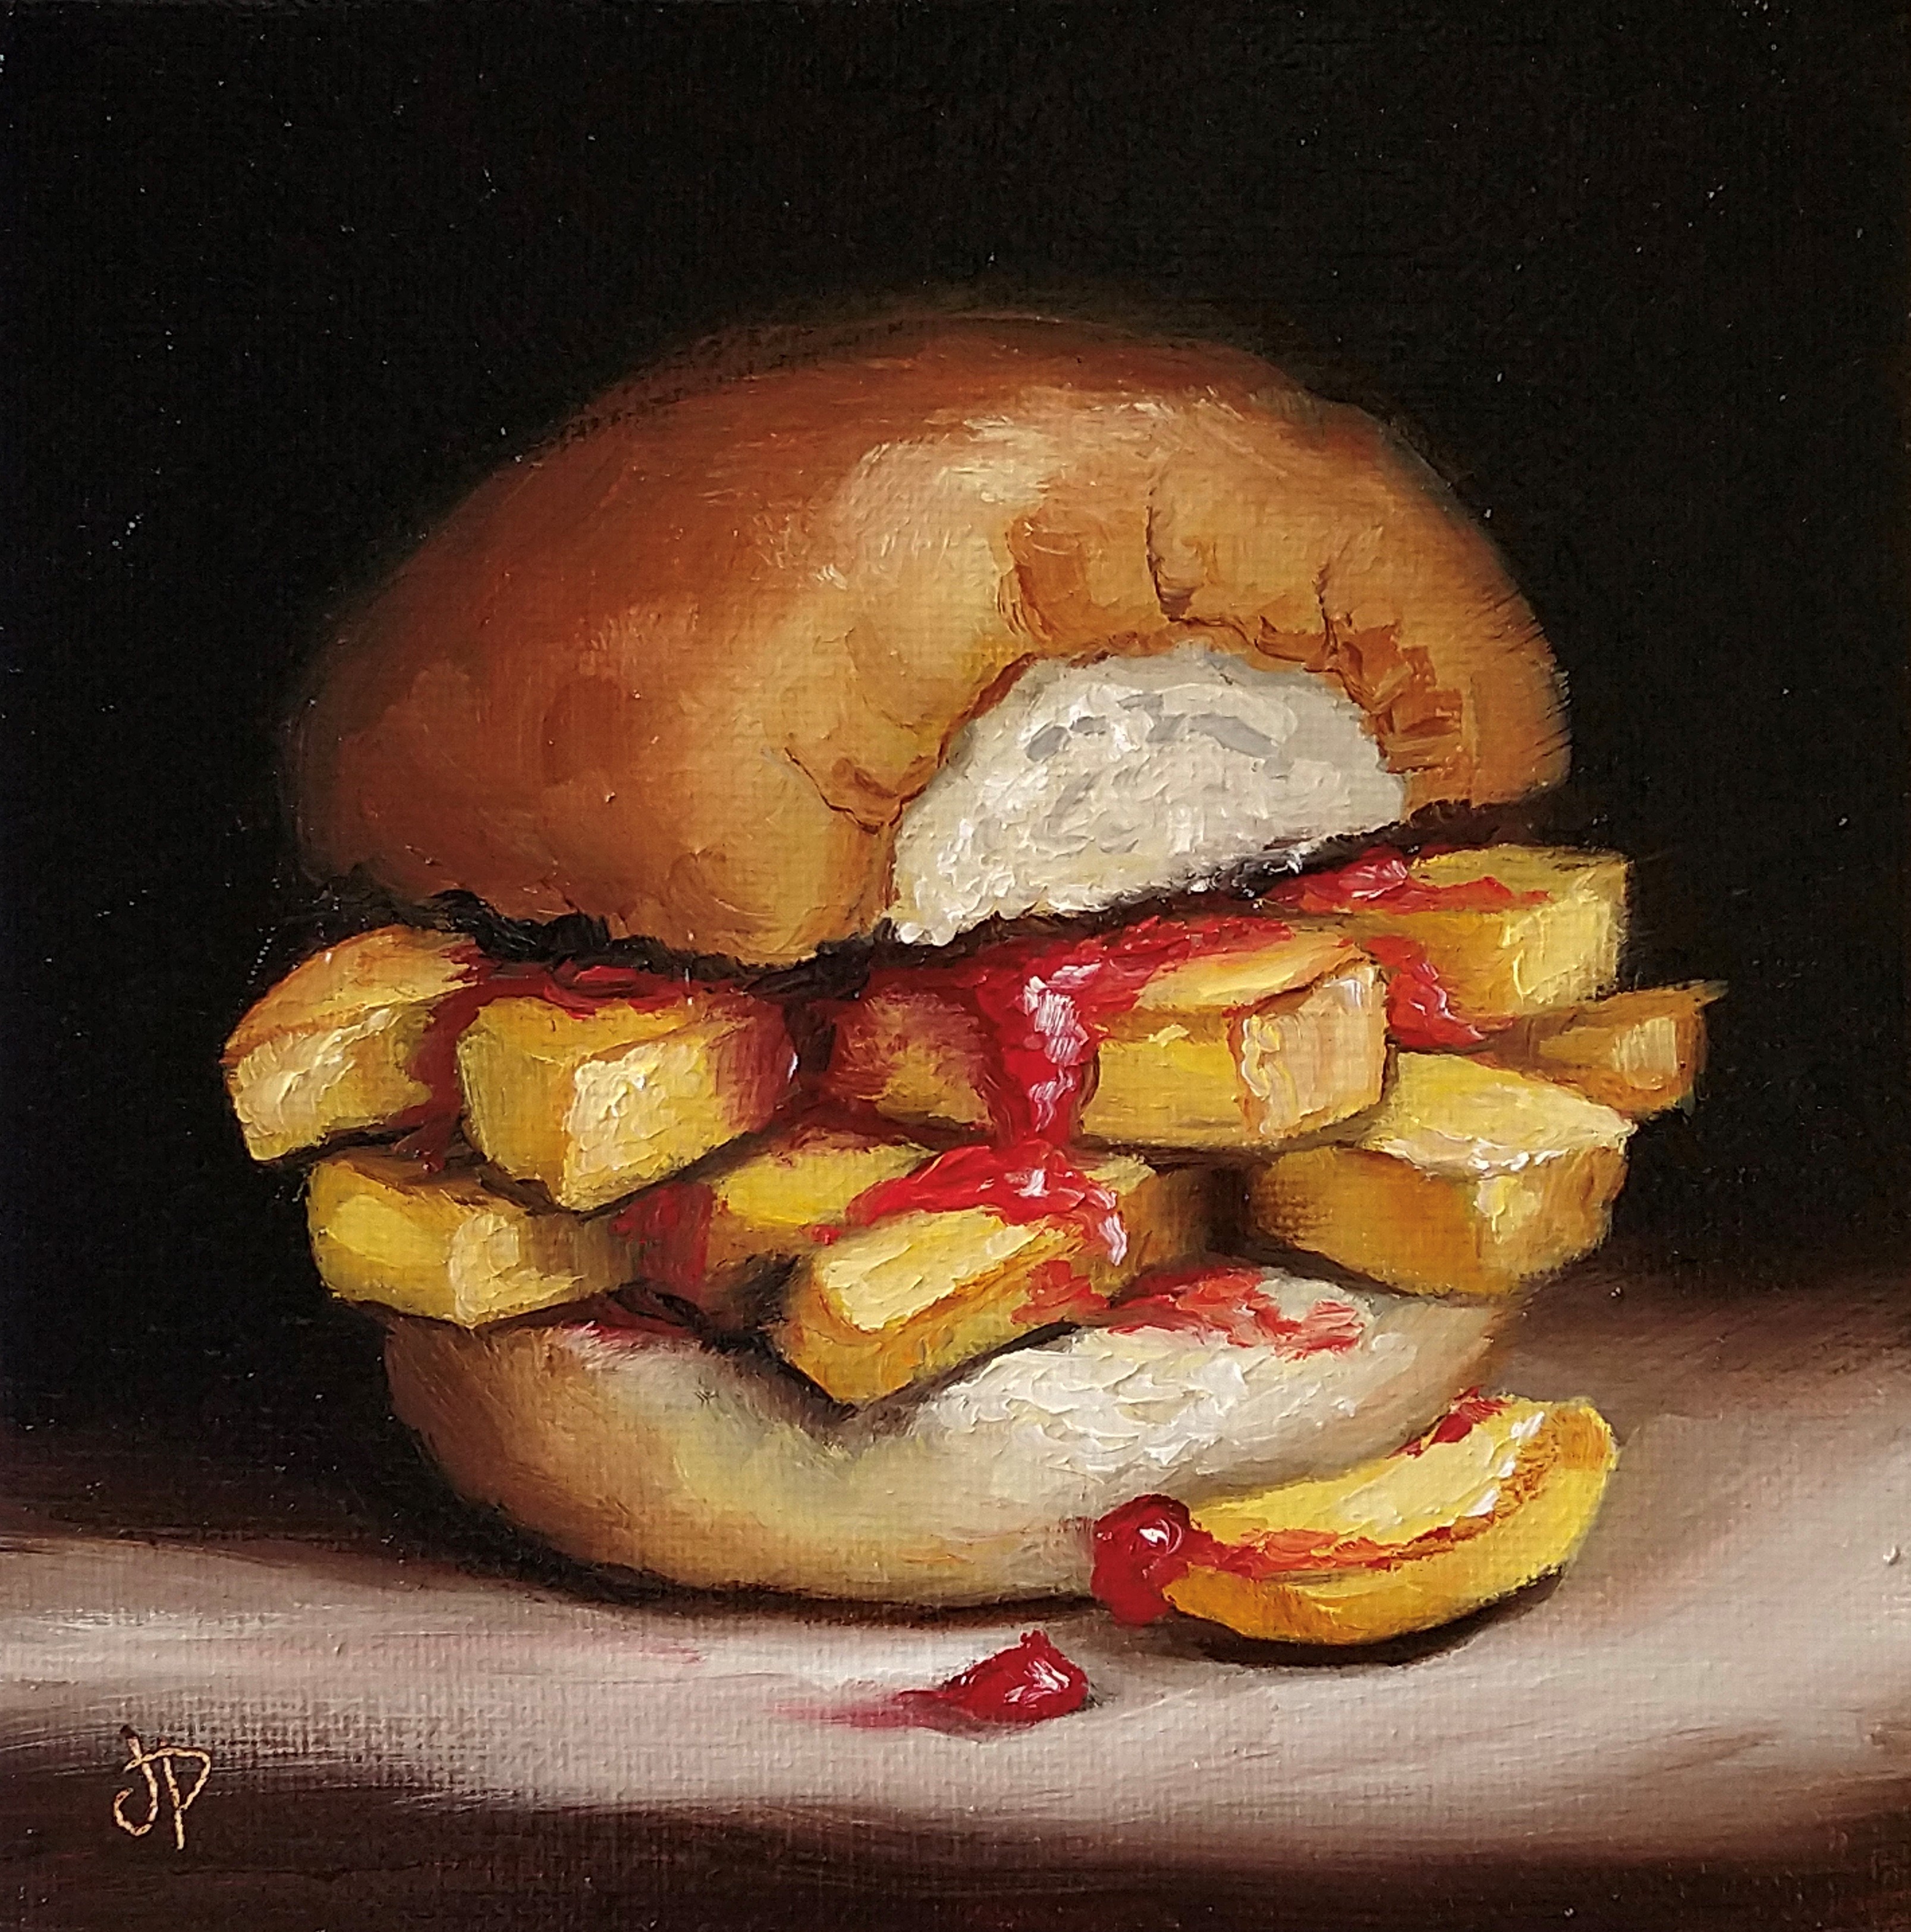 'A Roll and Chips' by artist Jane Palmer